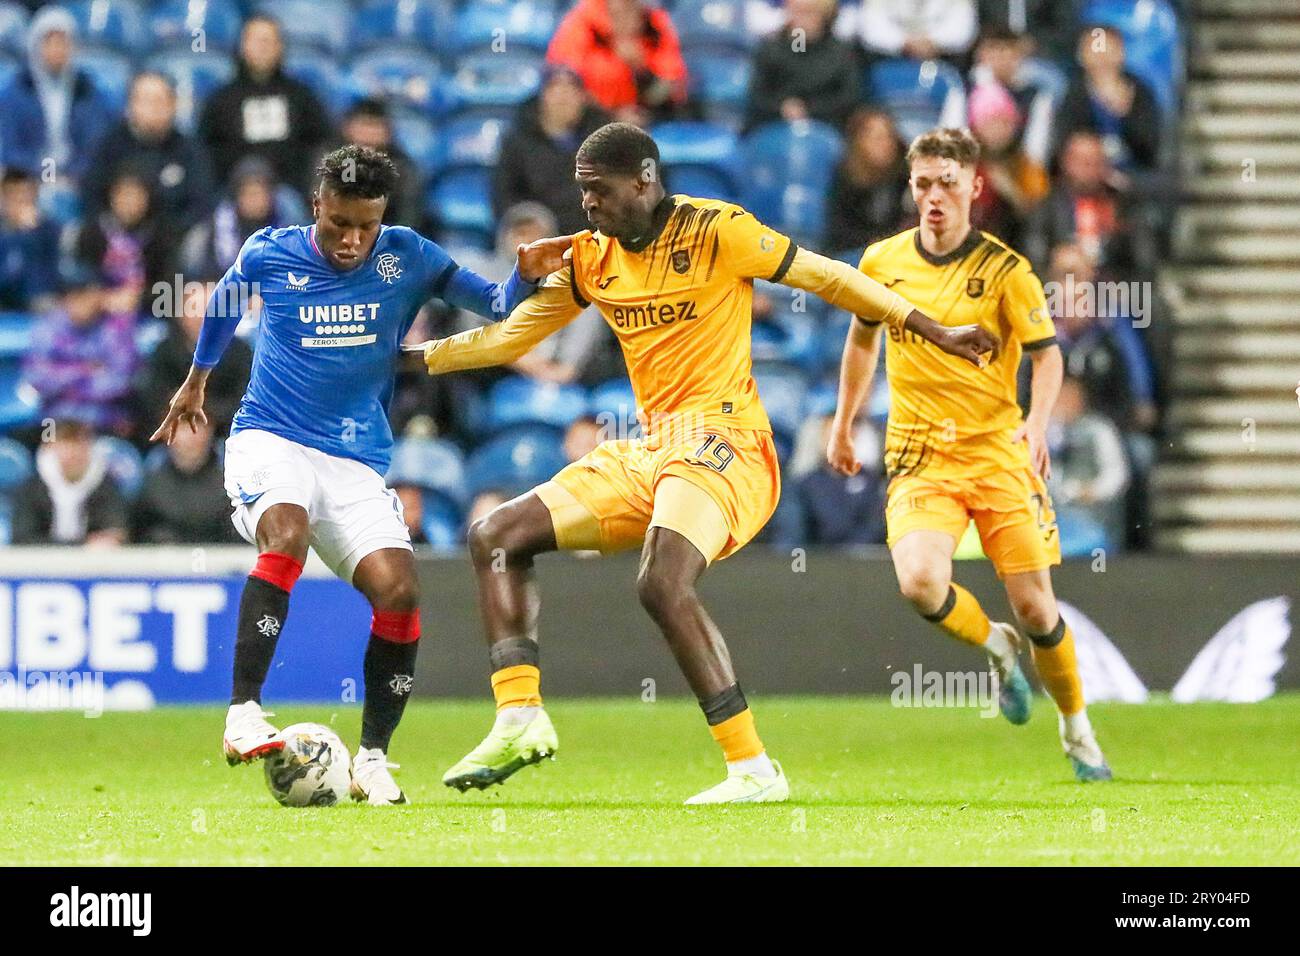 27 Sept 23. Glasgow, UK. Rangers FC play Livingstone FC in the quarter finals of the Viaplay Cup at Ibrox stadium, Glasgow, Scotland, UK. The winner will progress to the play offs at Hampden later in the year. Credit: Findlay/ Alamy Live News Stock Photo